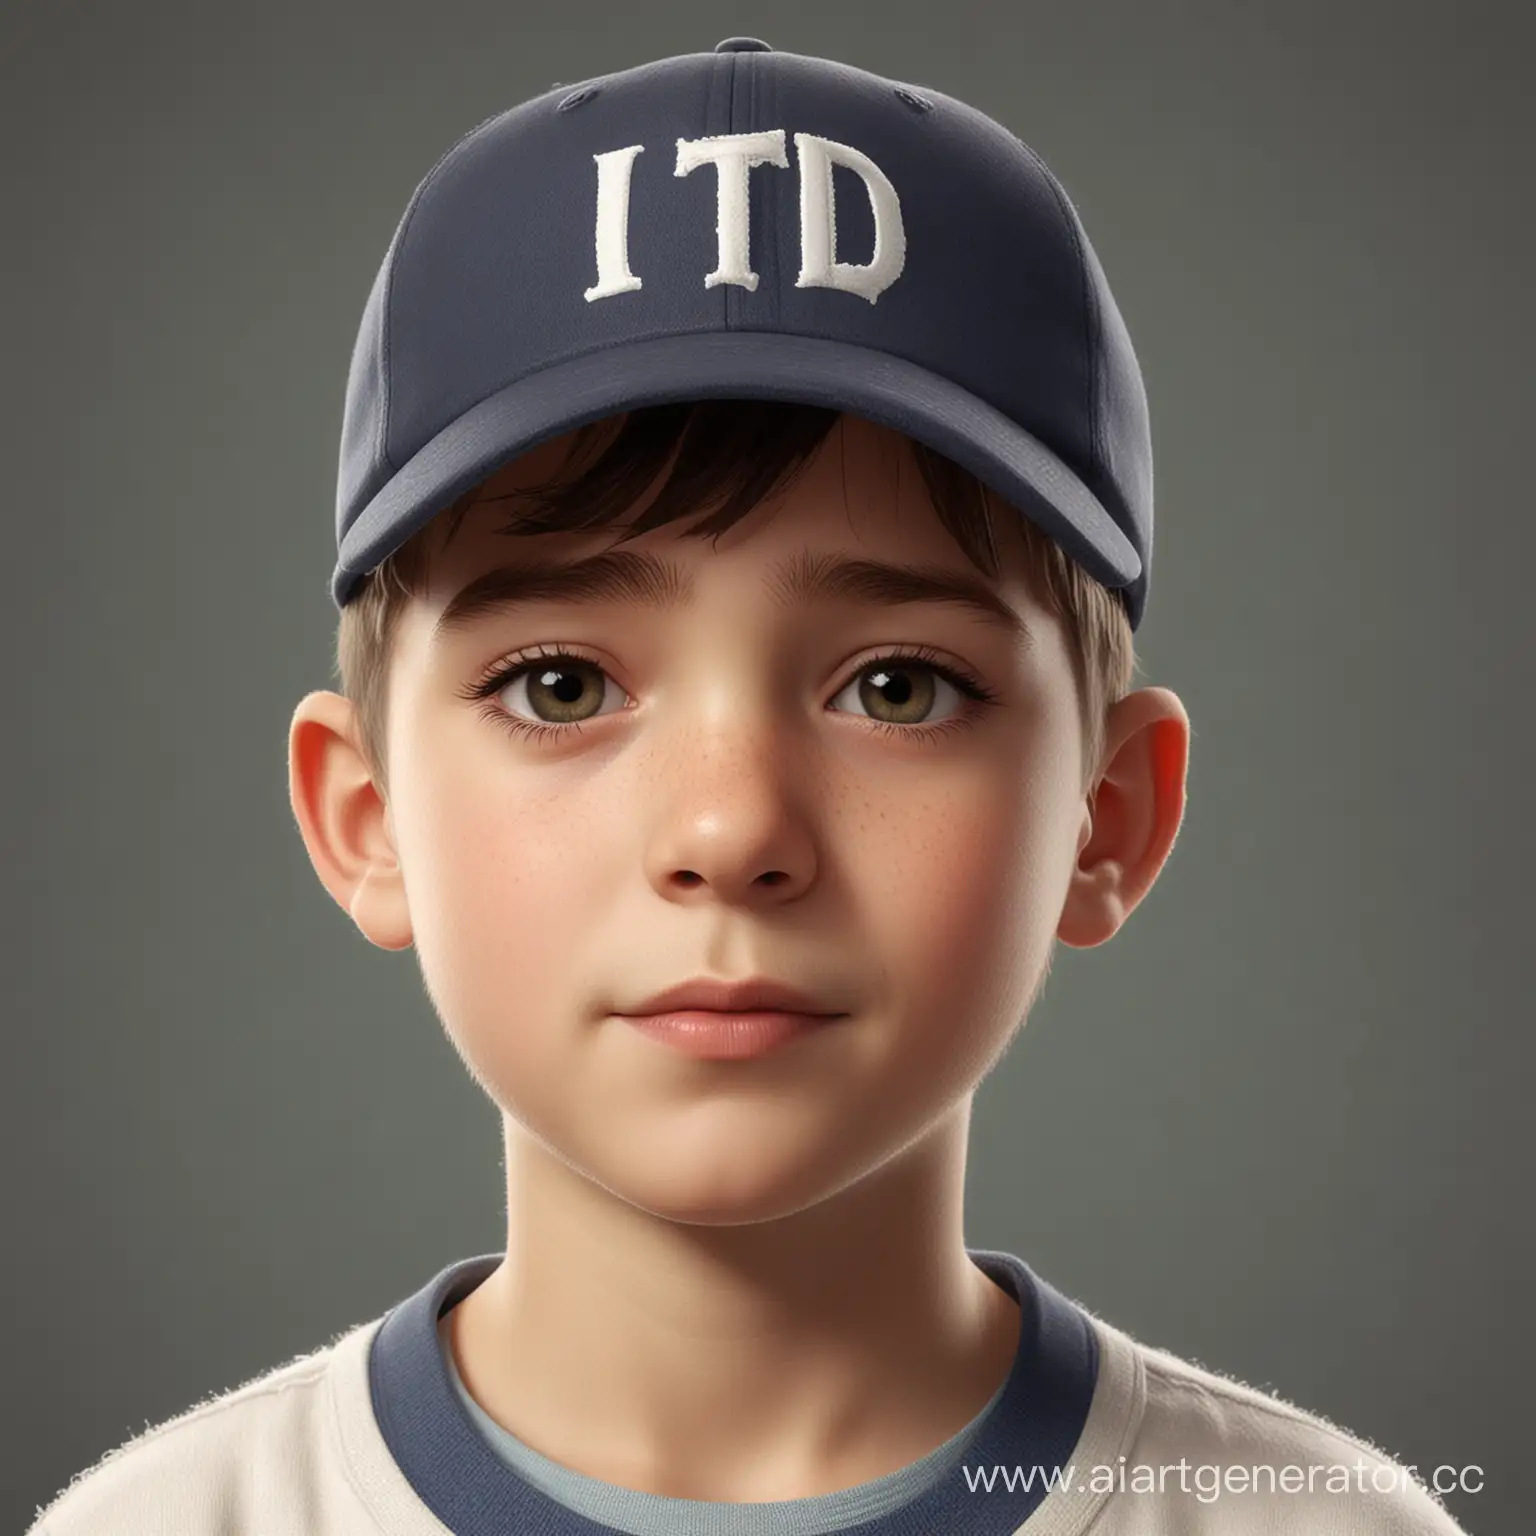 Animated-Portrait-of-a-Boy-in-an-ITD-Baseball-Cap